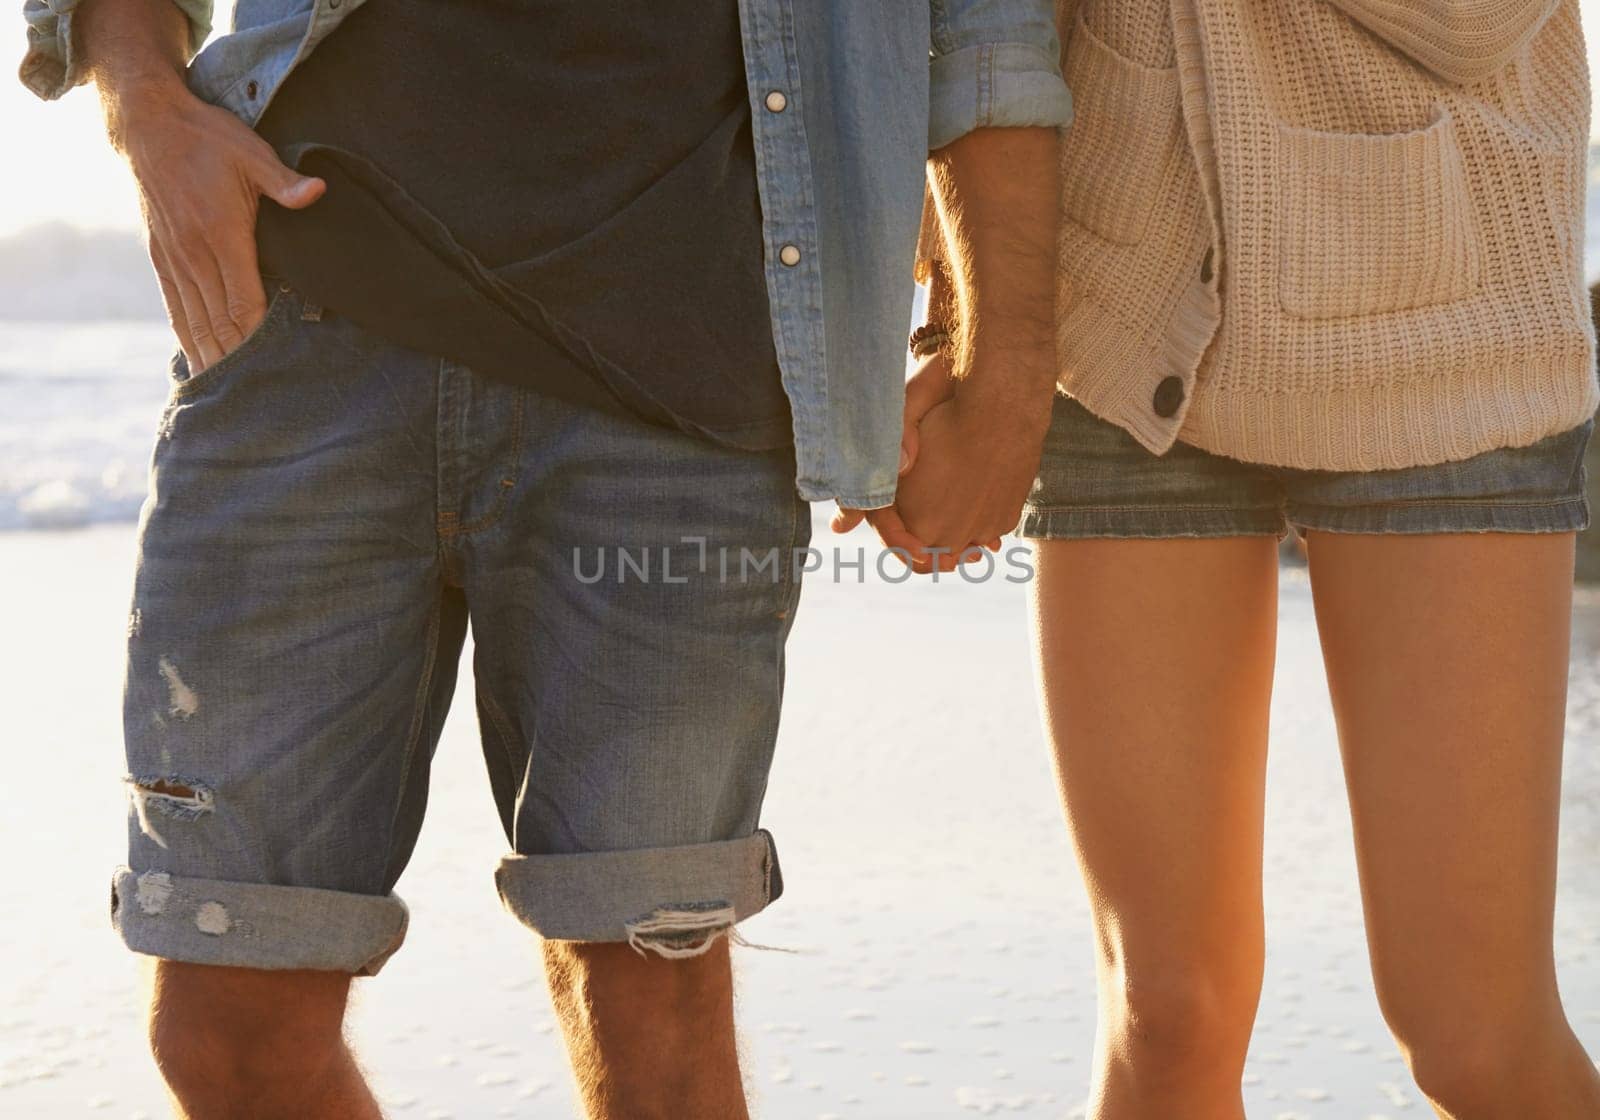 Beach, romance and couple holding hands on relax walk, nature journey or travel vacation in Peru. Love, relationship and closeup of marriage partner, soulmate or people bonding together in nature.